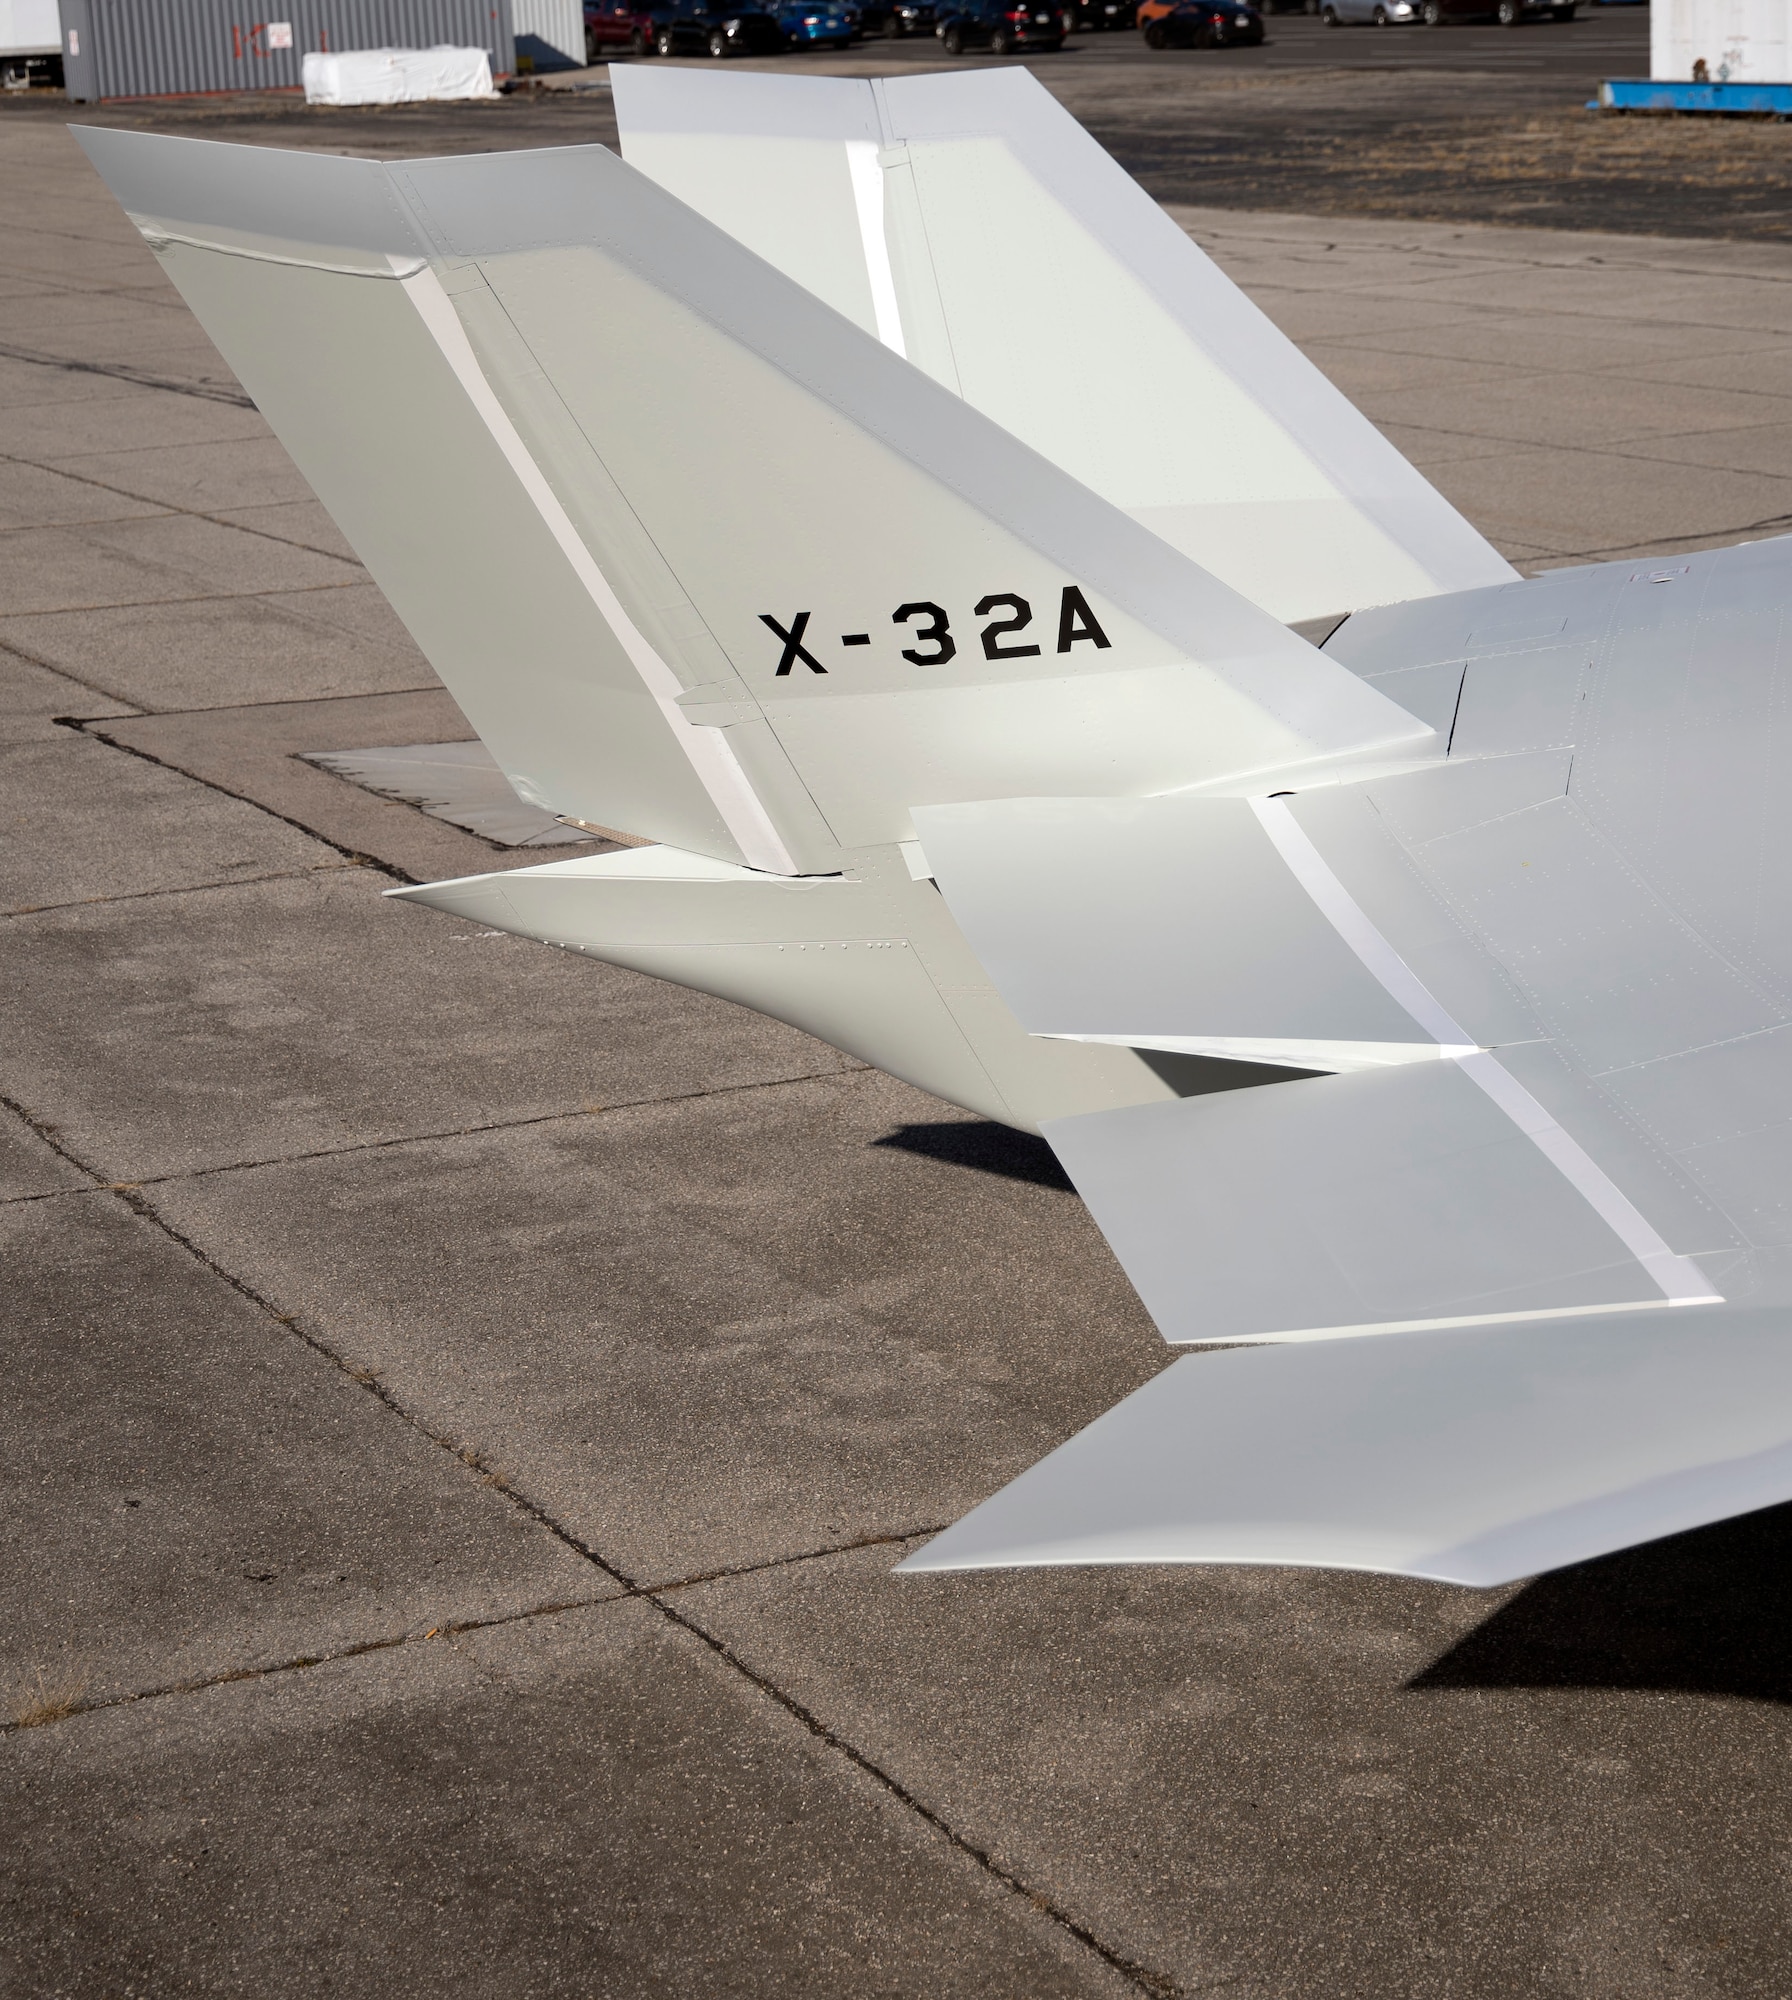 Boeing X-32A at the National Museum of the USAF.